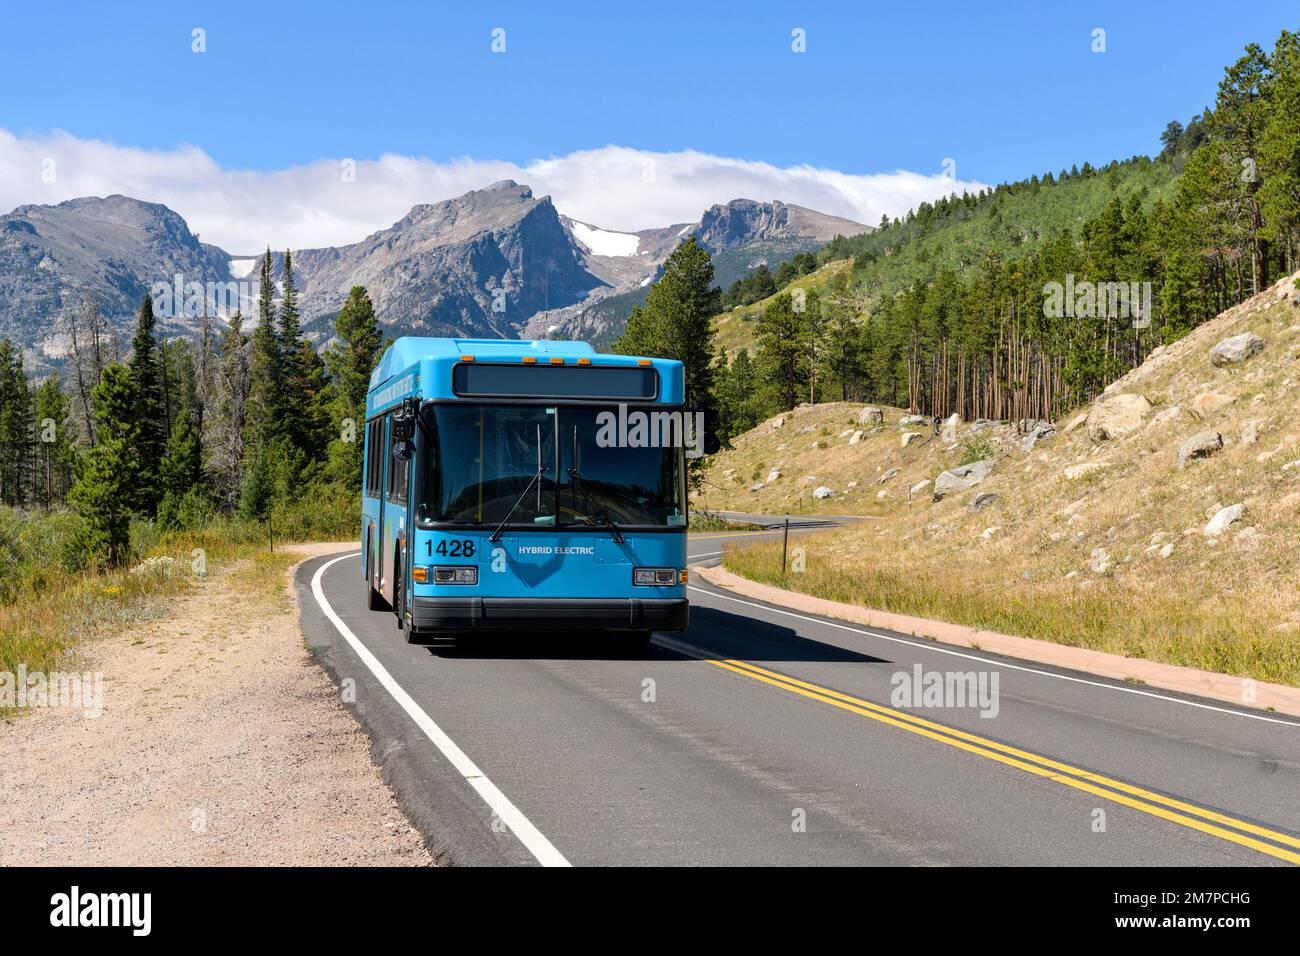 Shuttle on Bear Lake Road - A hybrid electric shuttle bus running on scenic Bear Lake Road on a sunny Summer morning in Rocky Mountain National Park. Stock Photo